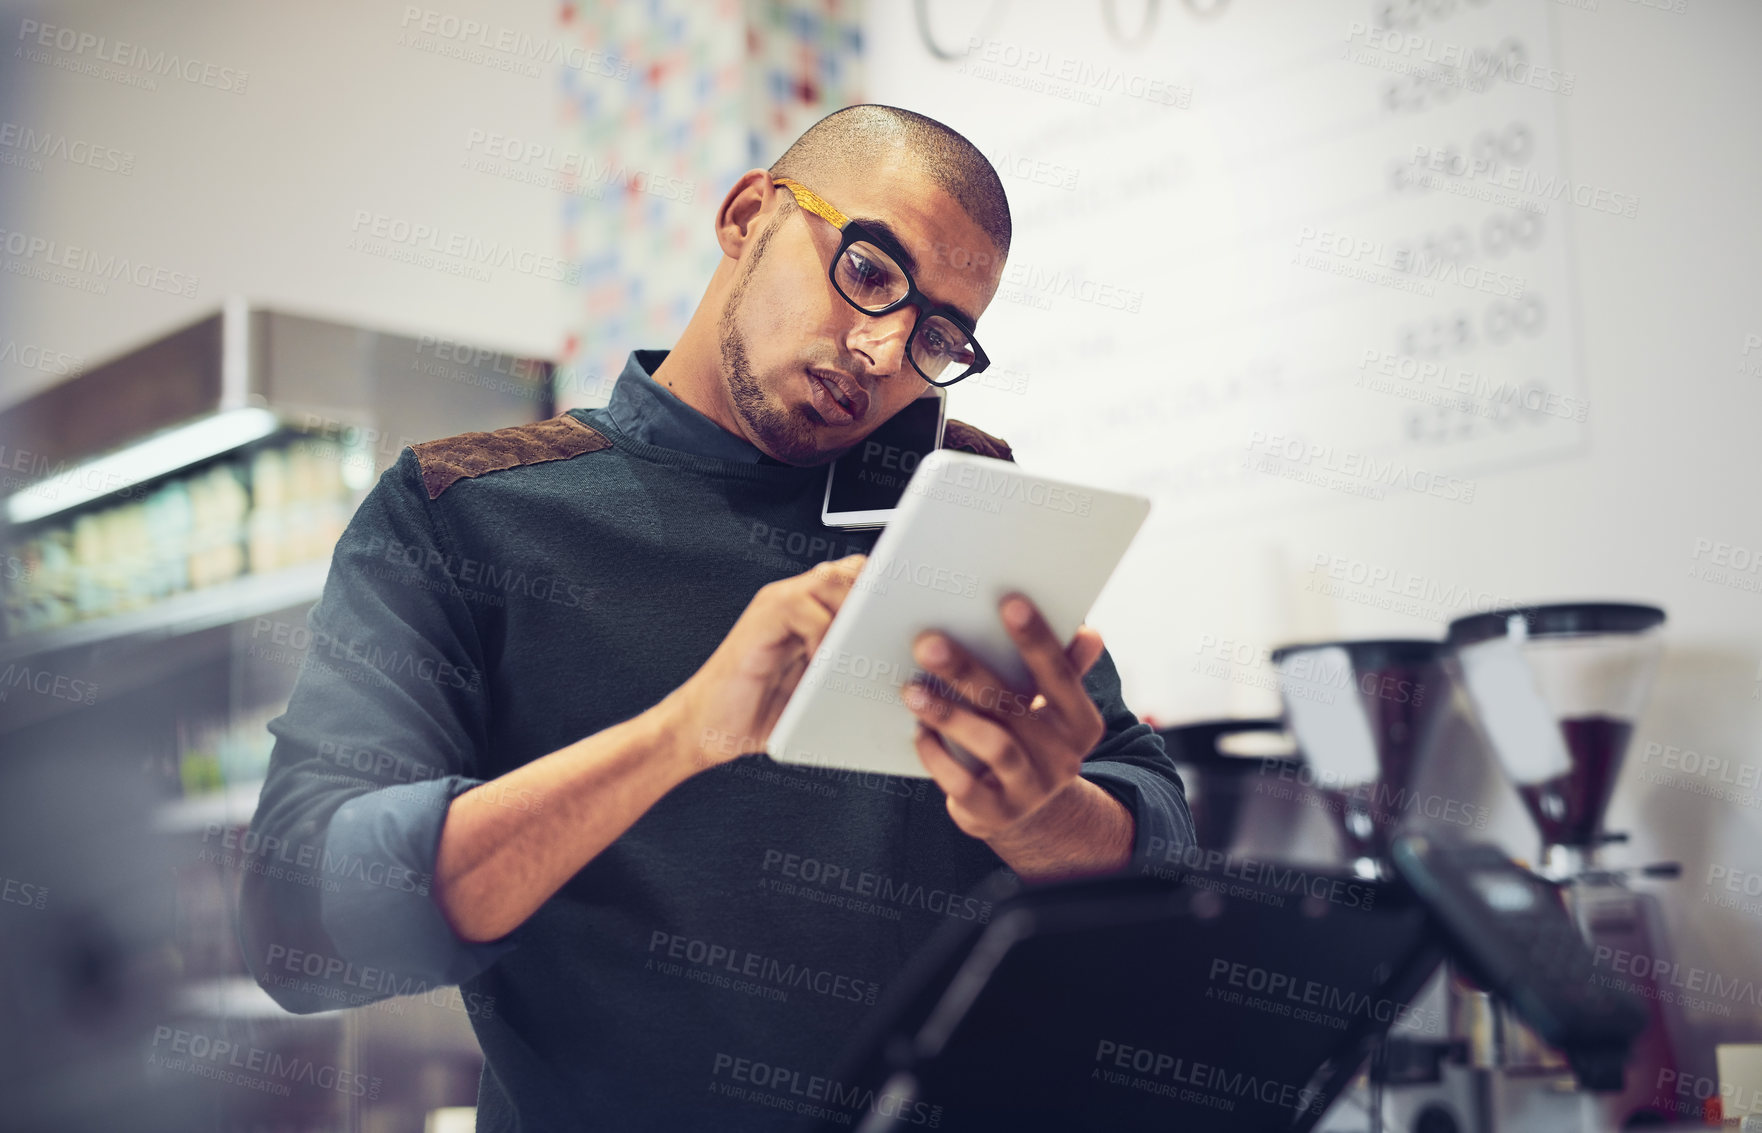 Buy stock photo Shot of a man talking on his cellphone in a coffee shop while using a digital tablet